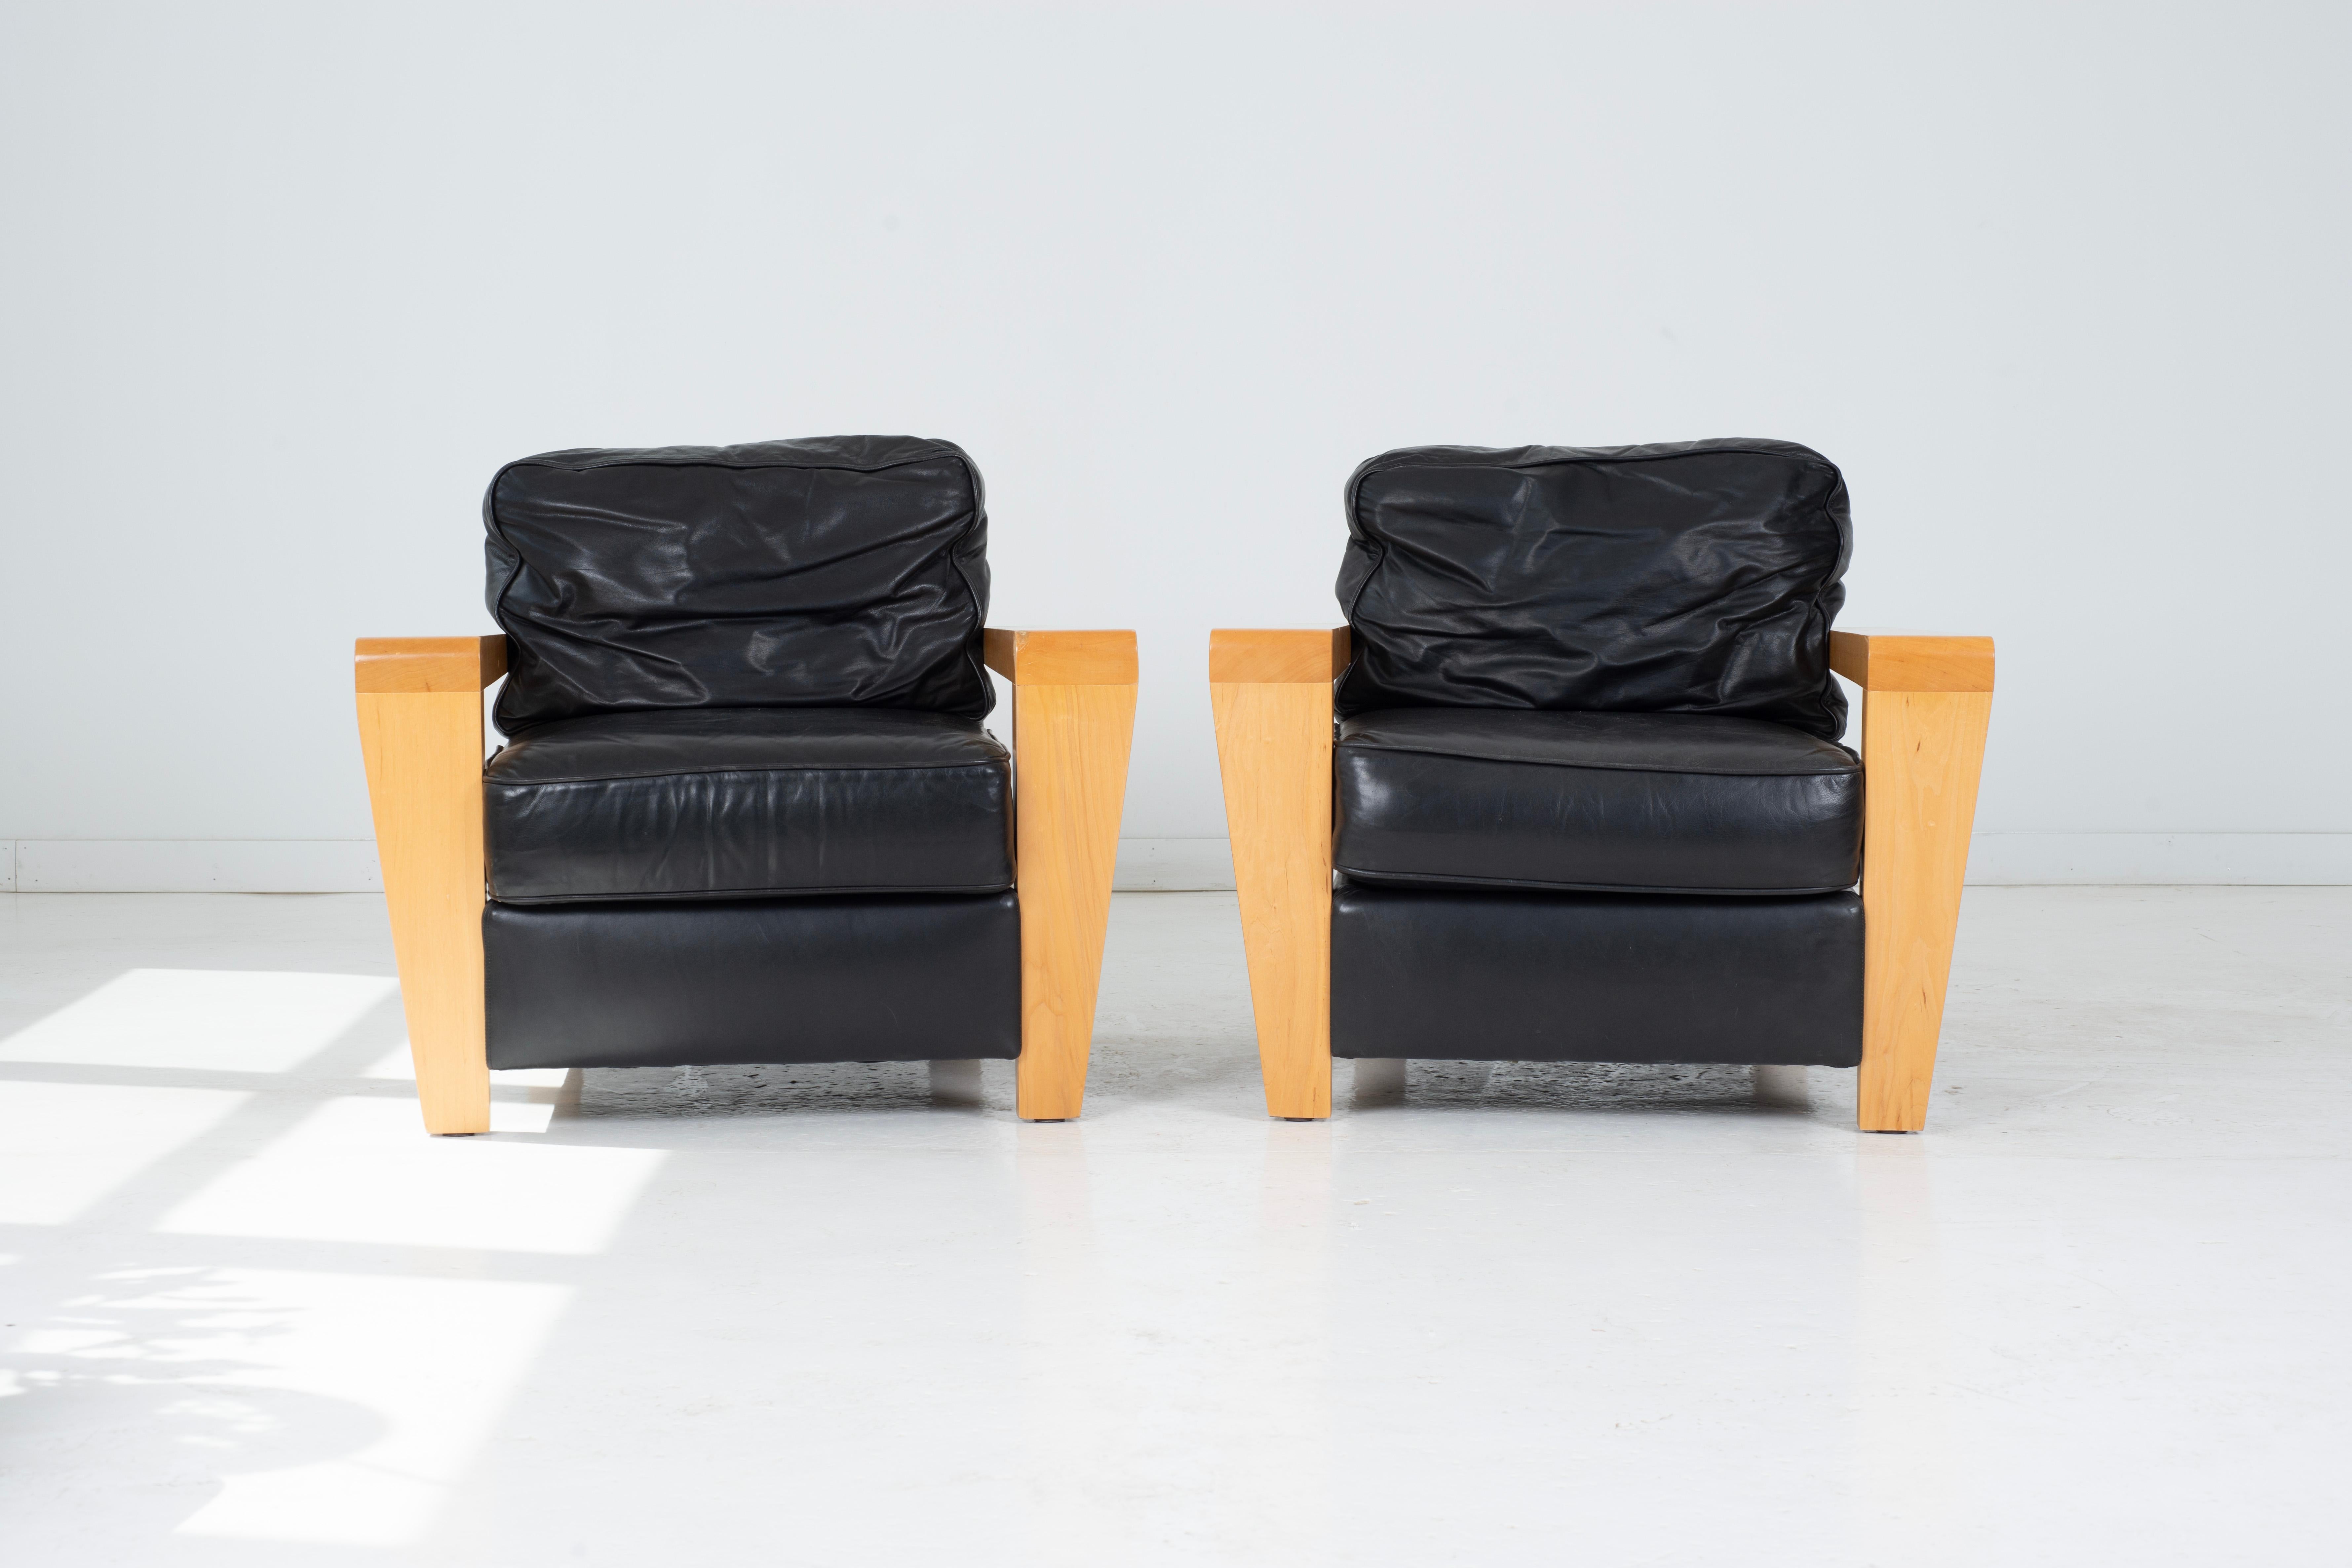 Introducing a striking pair of contemporary black leather lounge chairs and ottomans, designed exclusively for Thayer Coggin. These sophisticated pieces showcase the beauty of original, nicely worn leather, exuding a timeless charm and character